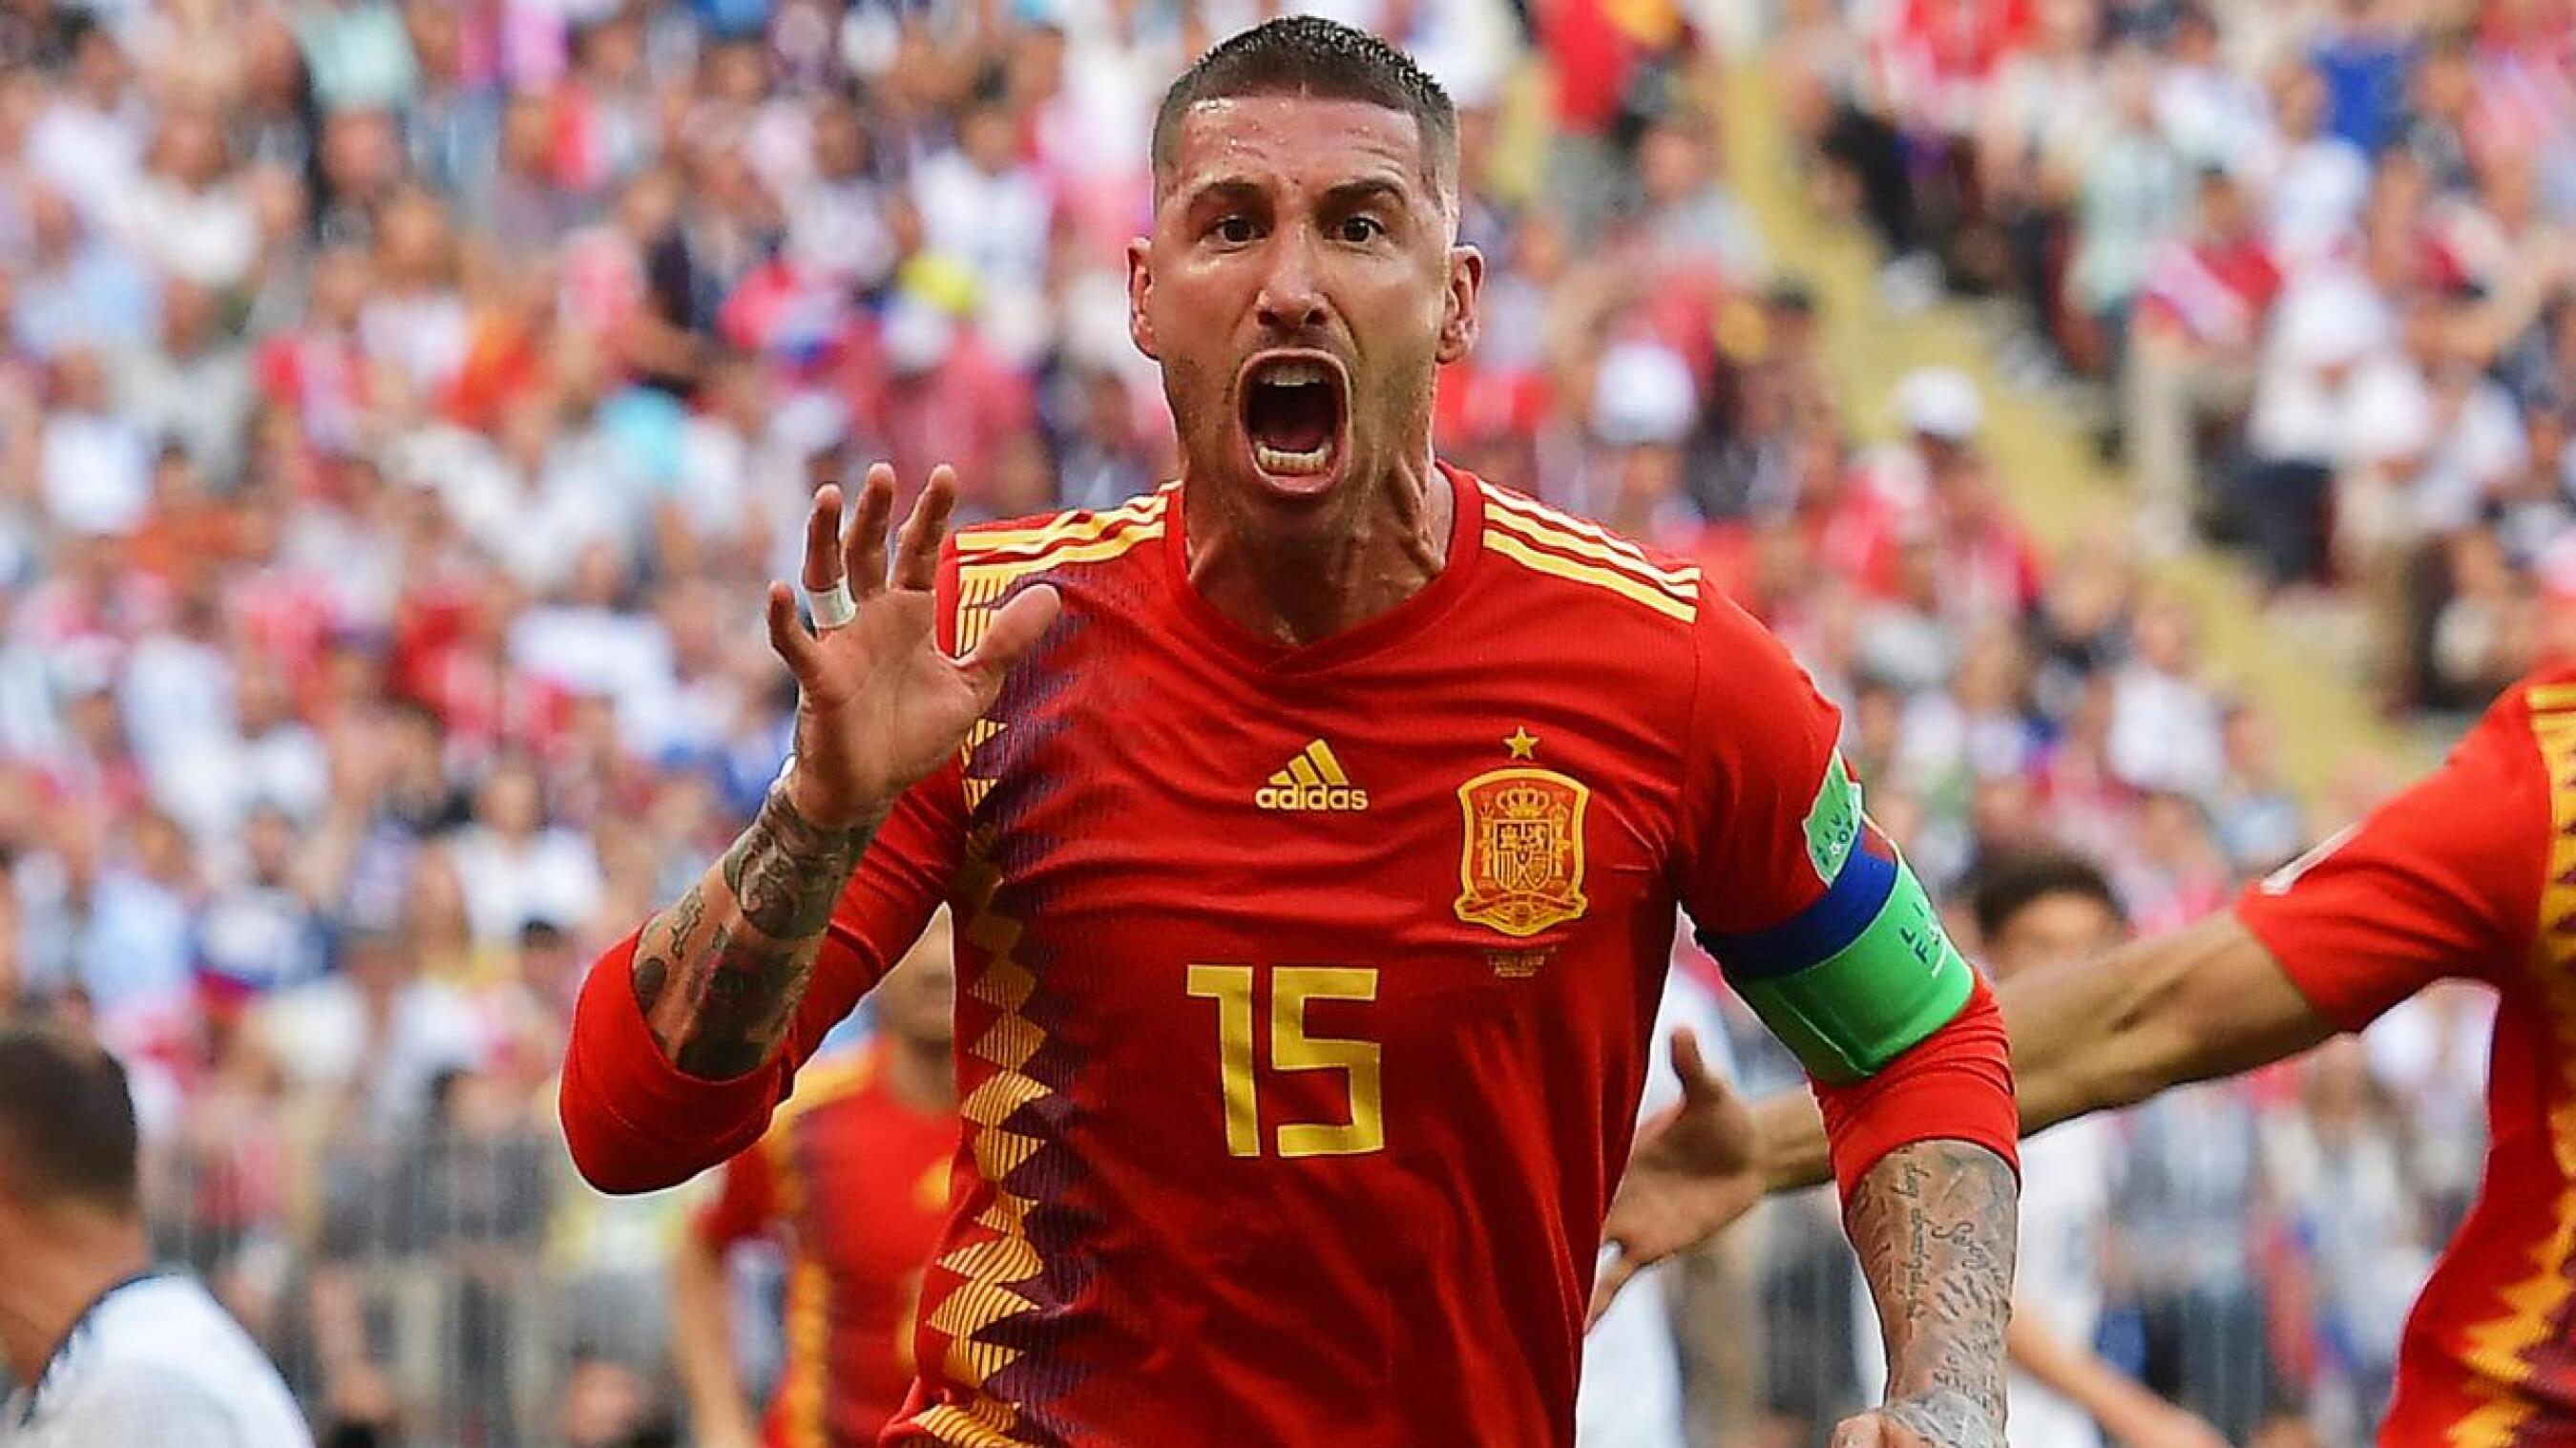 Spain's most capped player Sergio Ramos has announced his international retirement on Thursday after being told by new coach Luis de la Fuente that he was not part of his plans